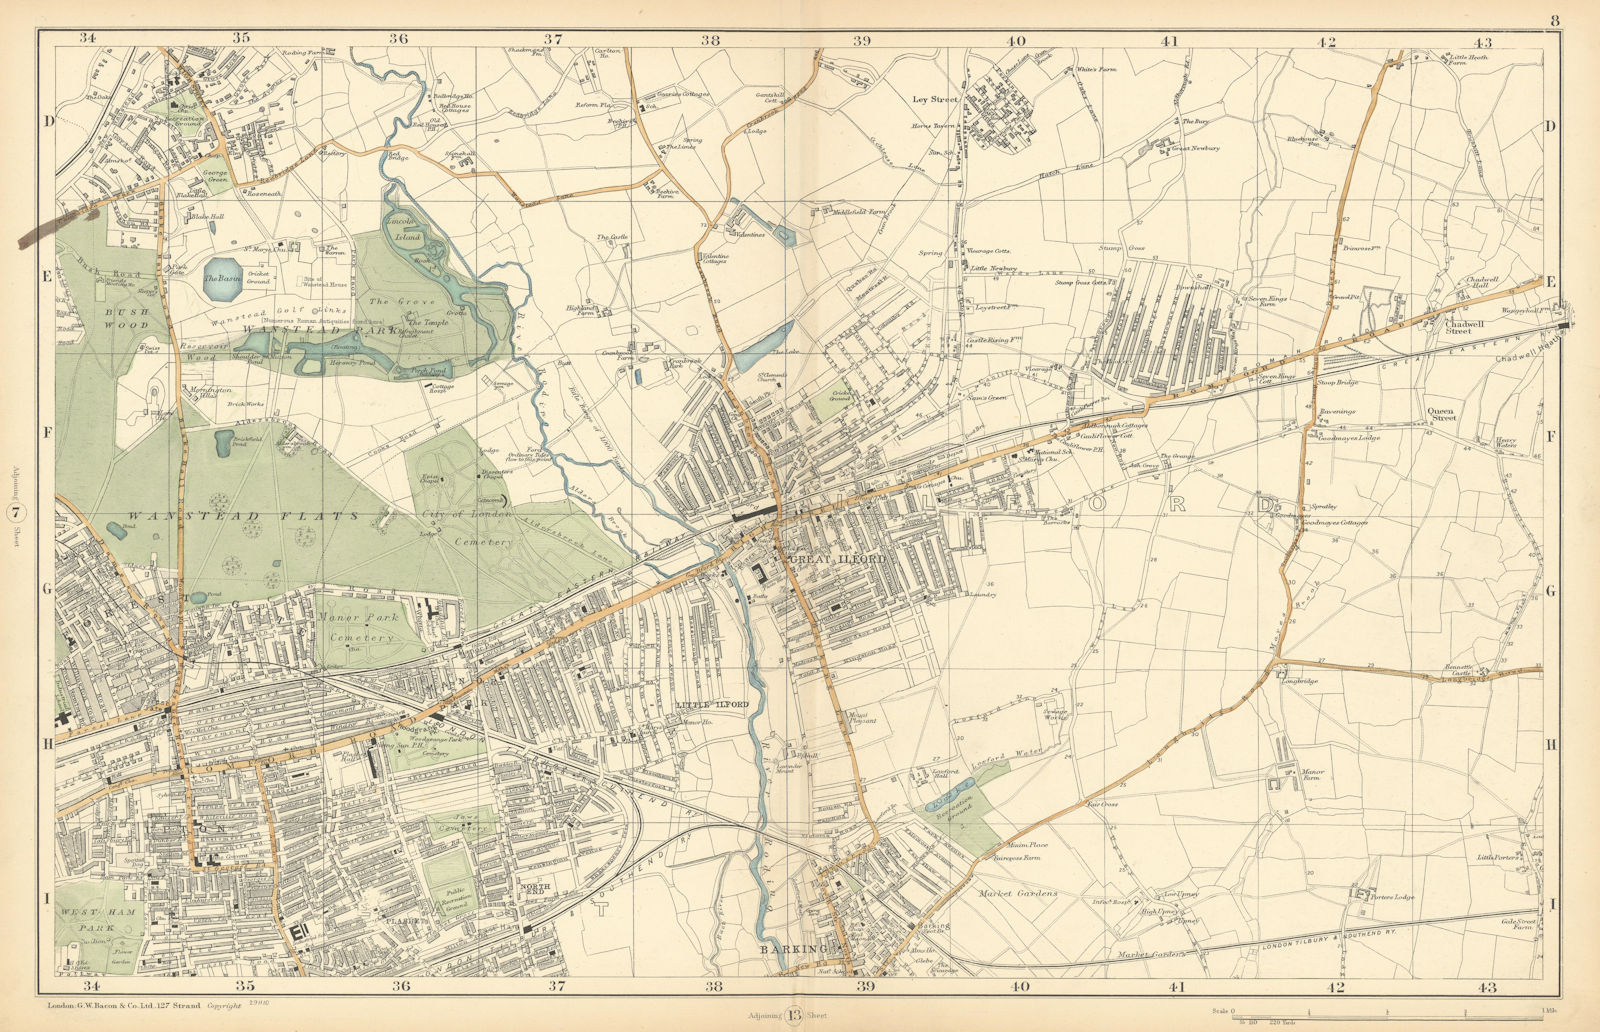 WANSTEAD ILFORD BARKING Forest Gate Seven Kings Chadwell Heath. BACON  1900 map